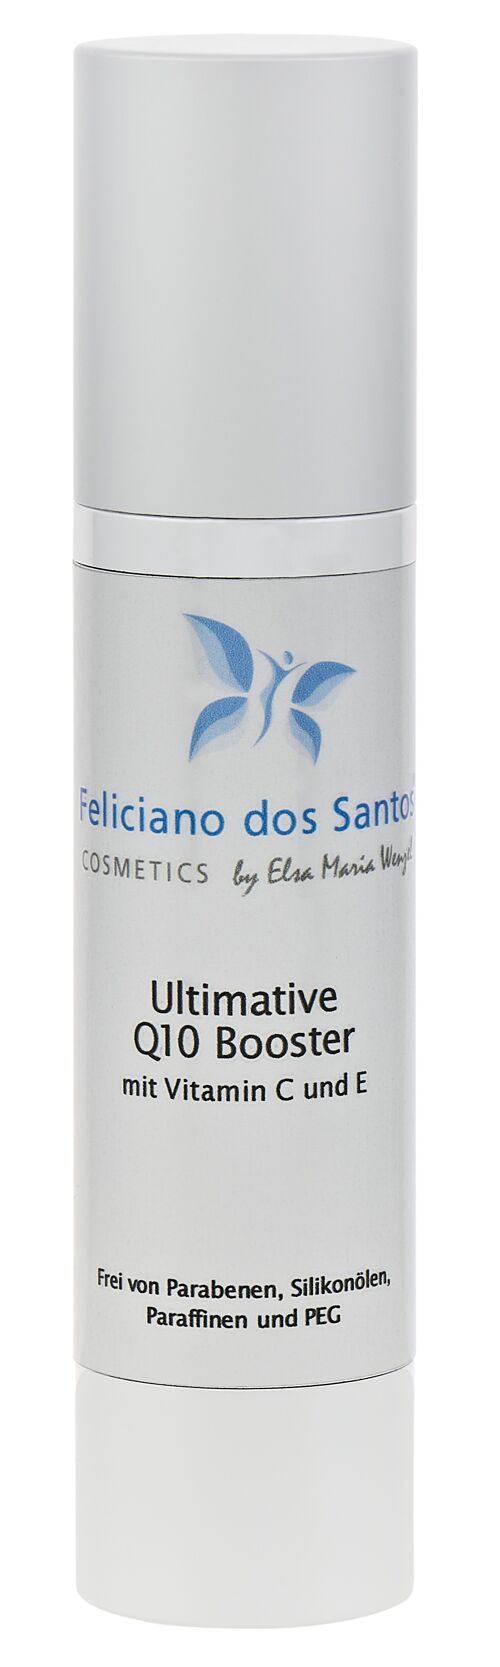 Ultimative Q10 Booster